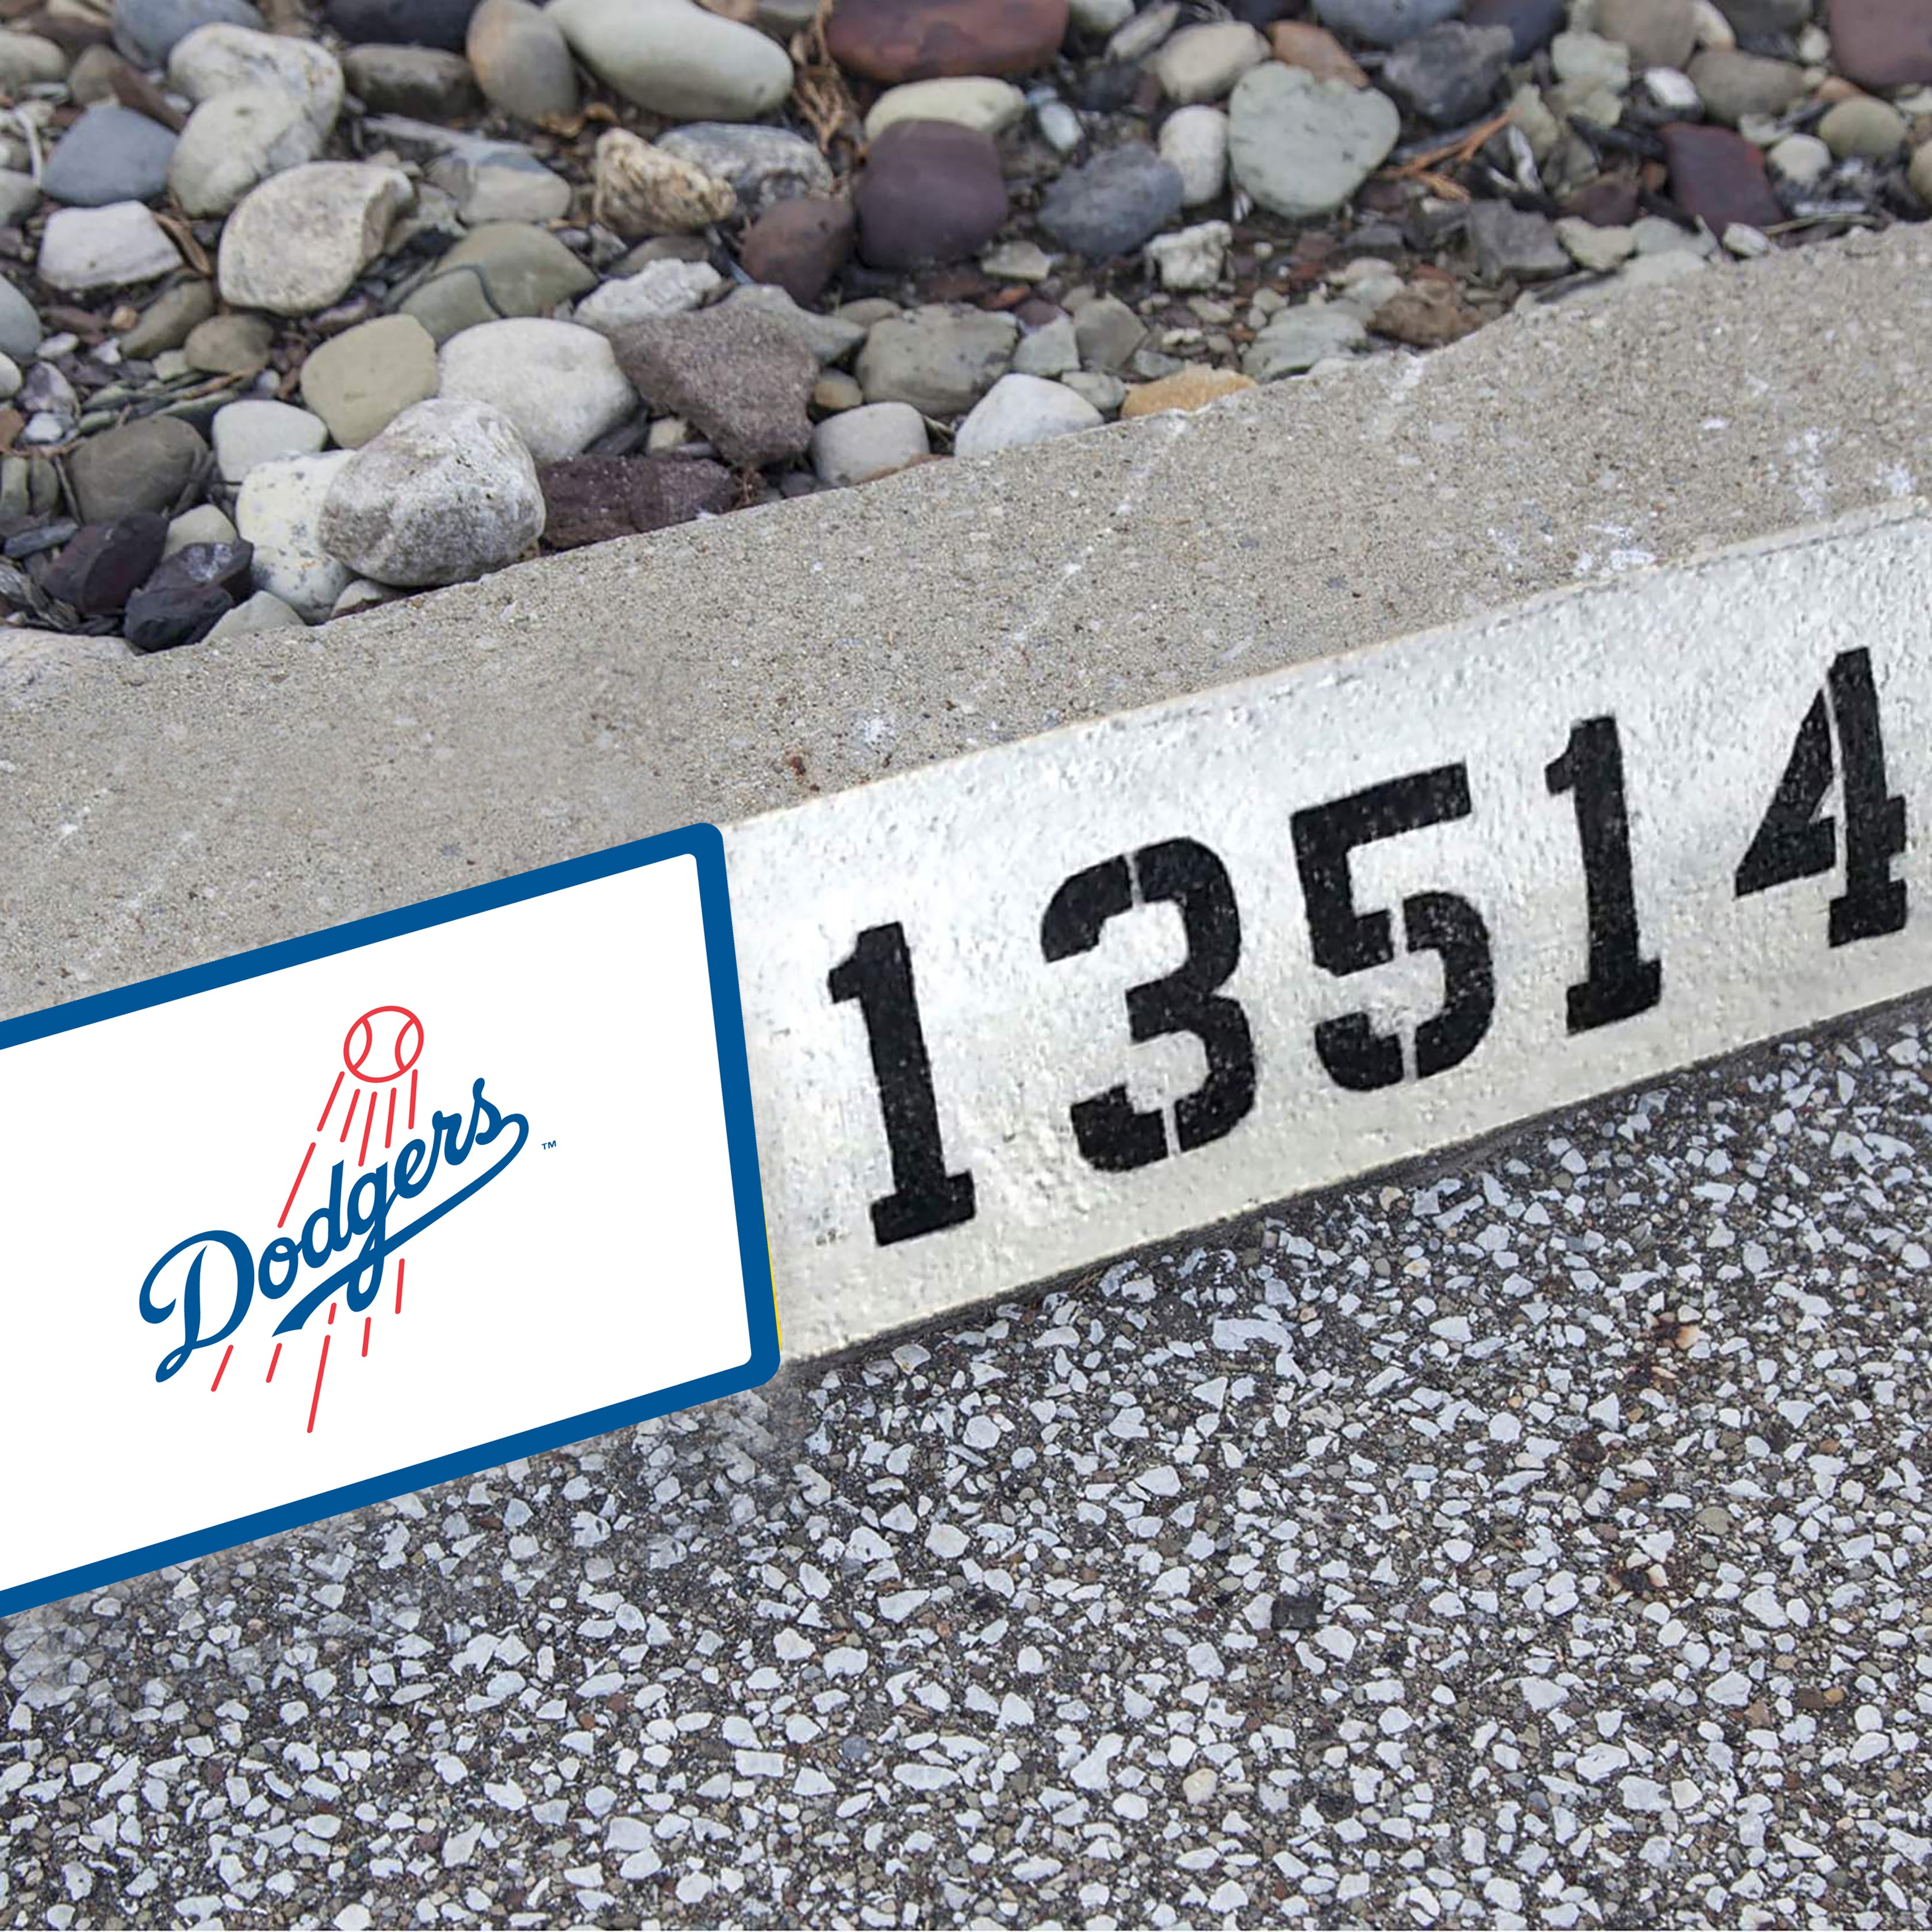 Los Angeles Dodgers License Plate